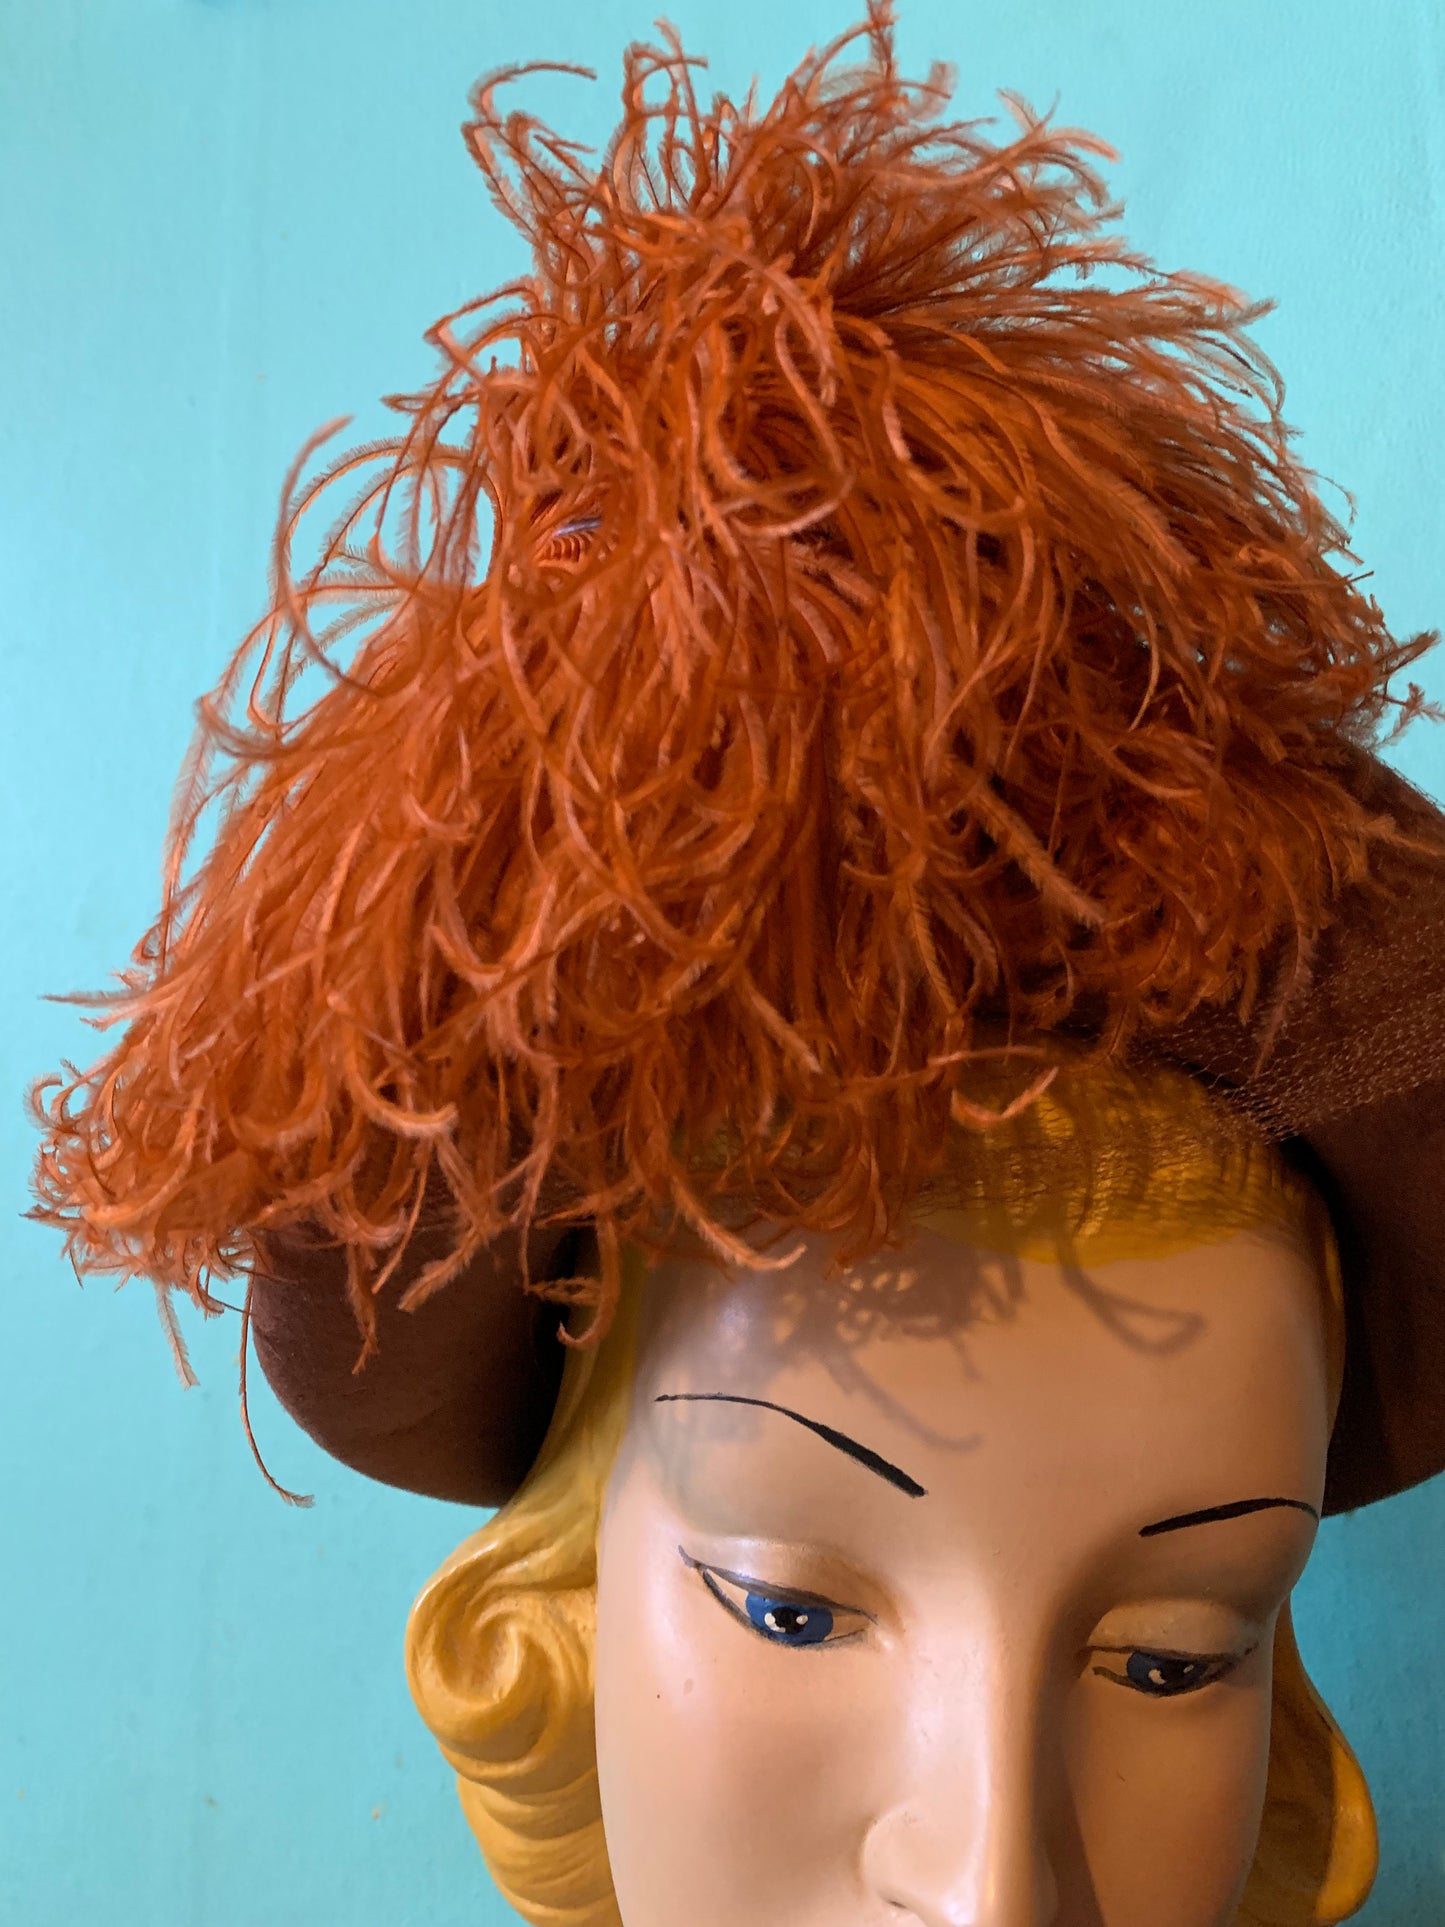 Cinnamon and Tangerine Dramatically Plumed Felted Hat circa 1940s